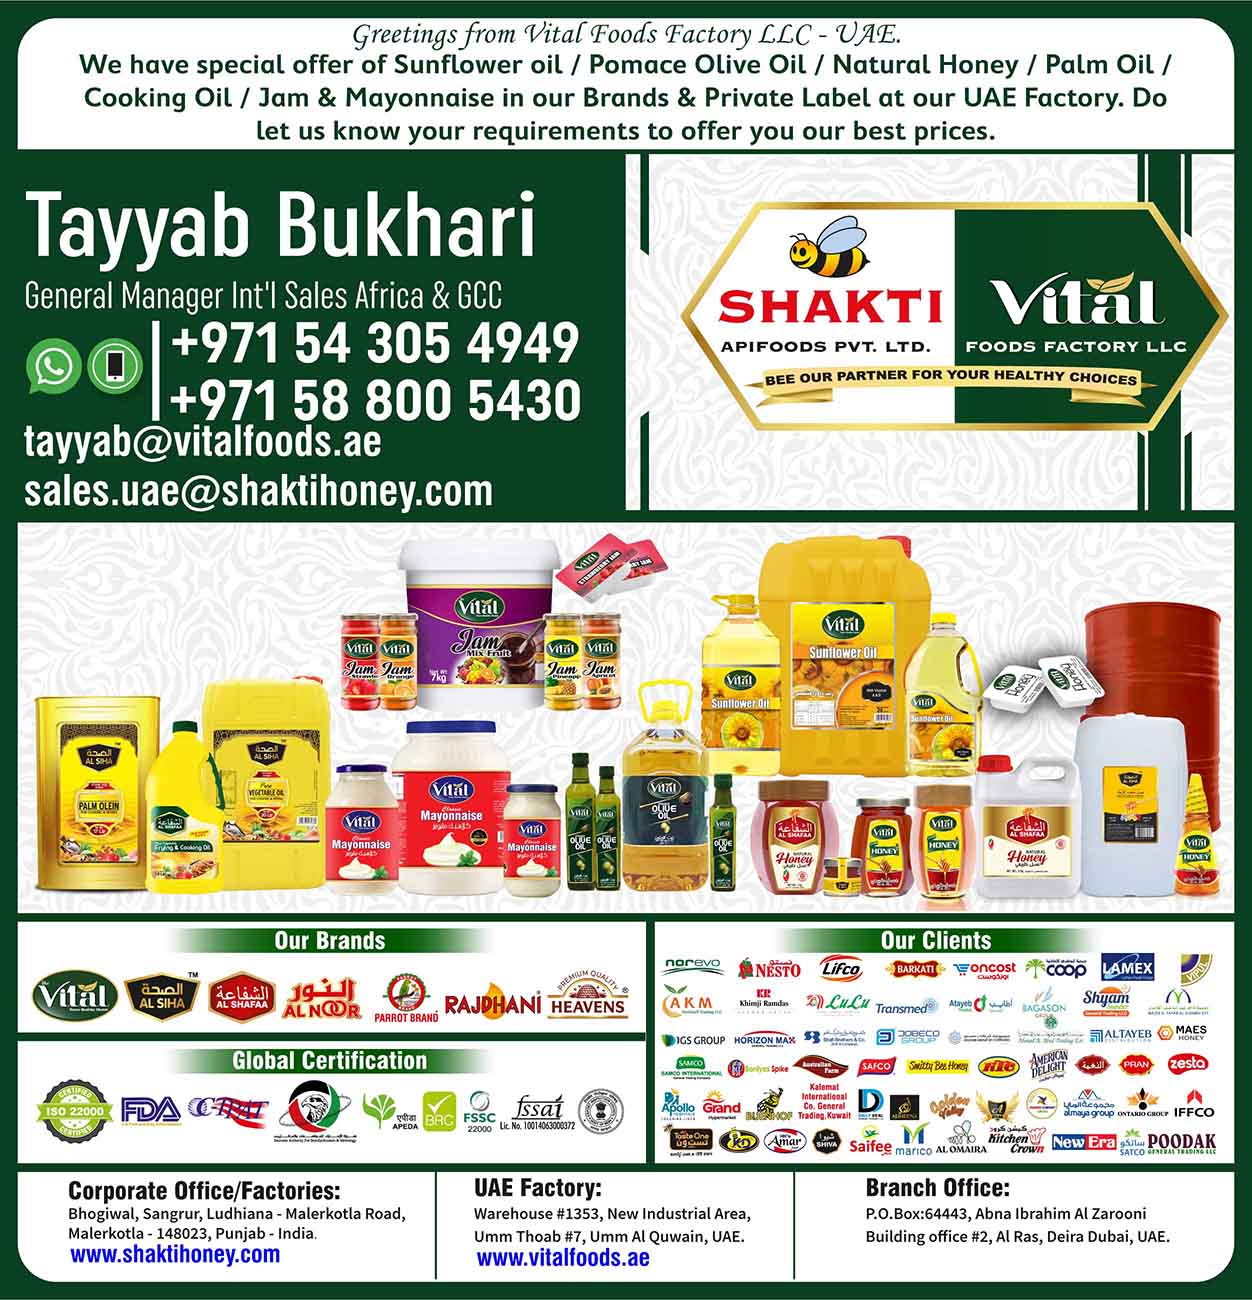 Cooking Oil, Palm Oil, Sunflower Oil, Pomace Olive Oil, Jam, Mayonnaise & Honey products - VFF LLC - UAE